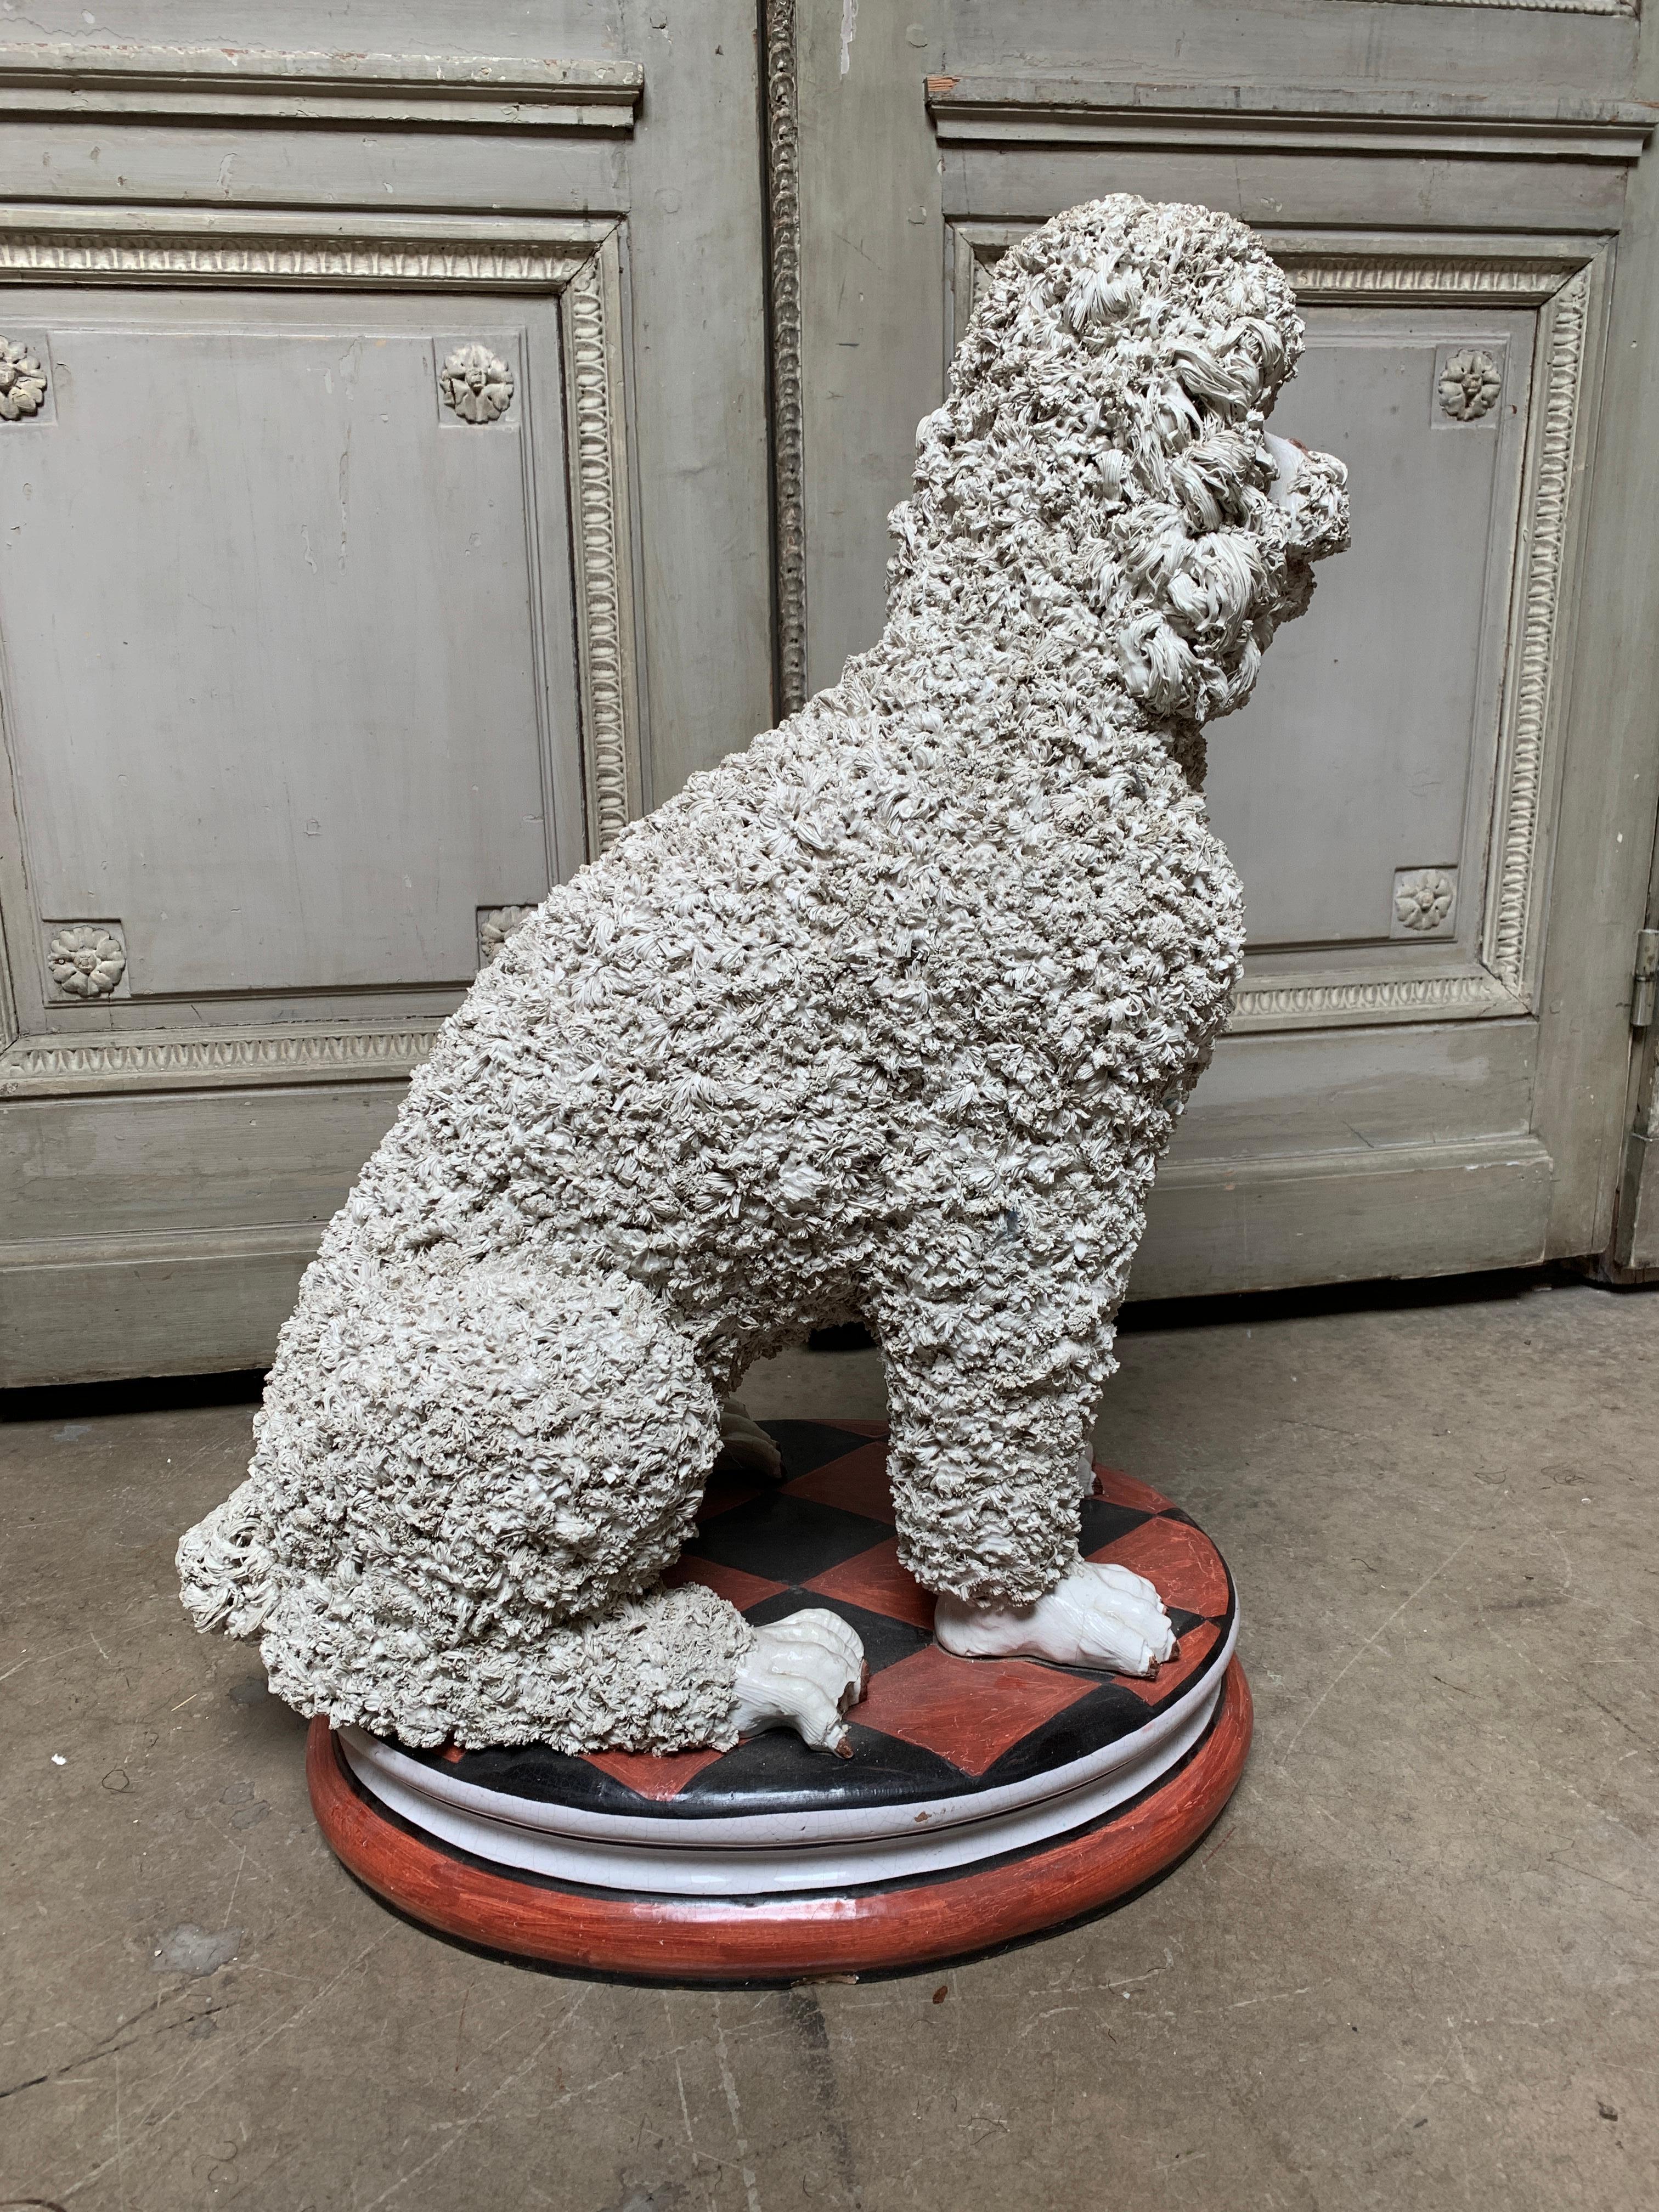 white standard poodle for sale